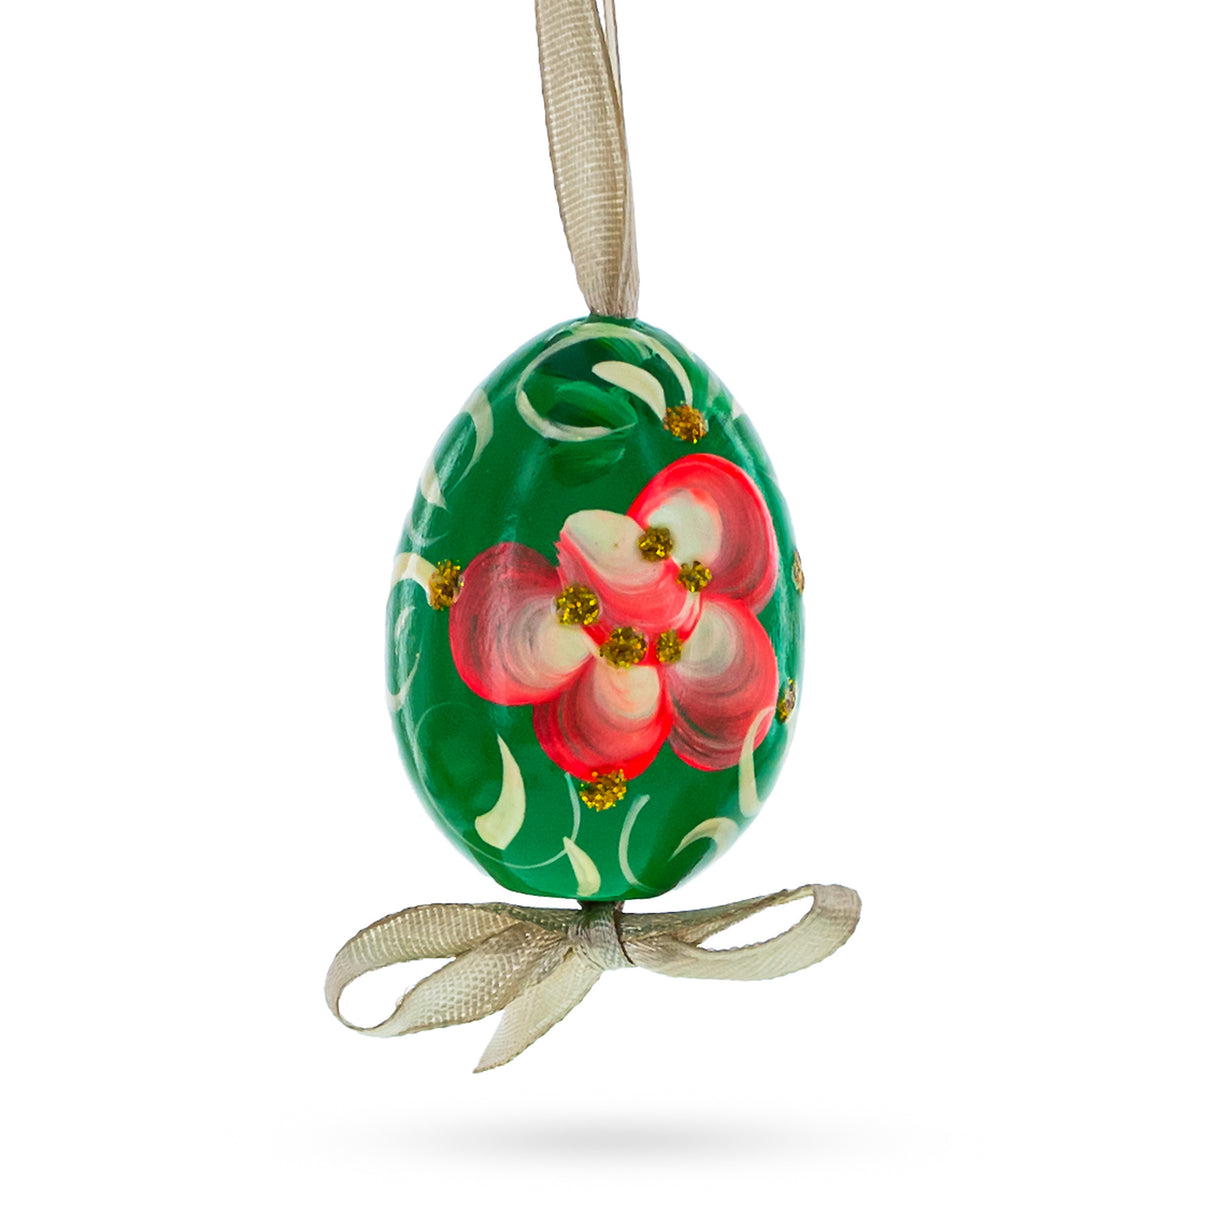 Flowery Painting Miniatured Multicolored Wooden Easter Egg Ornaments